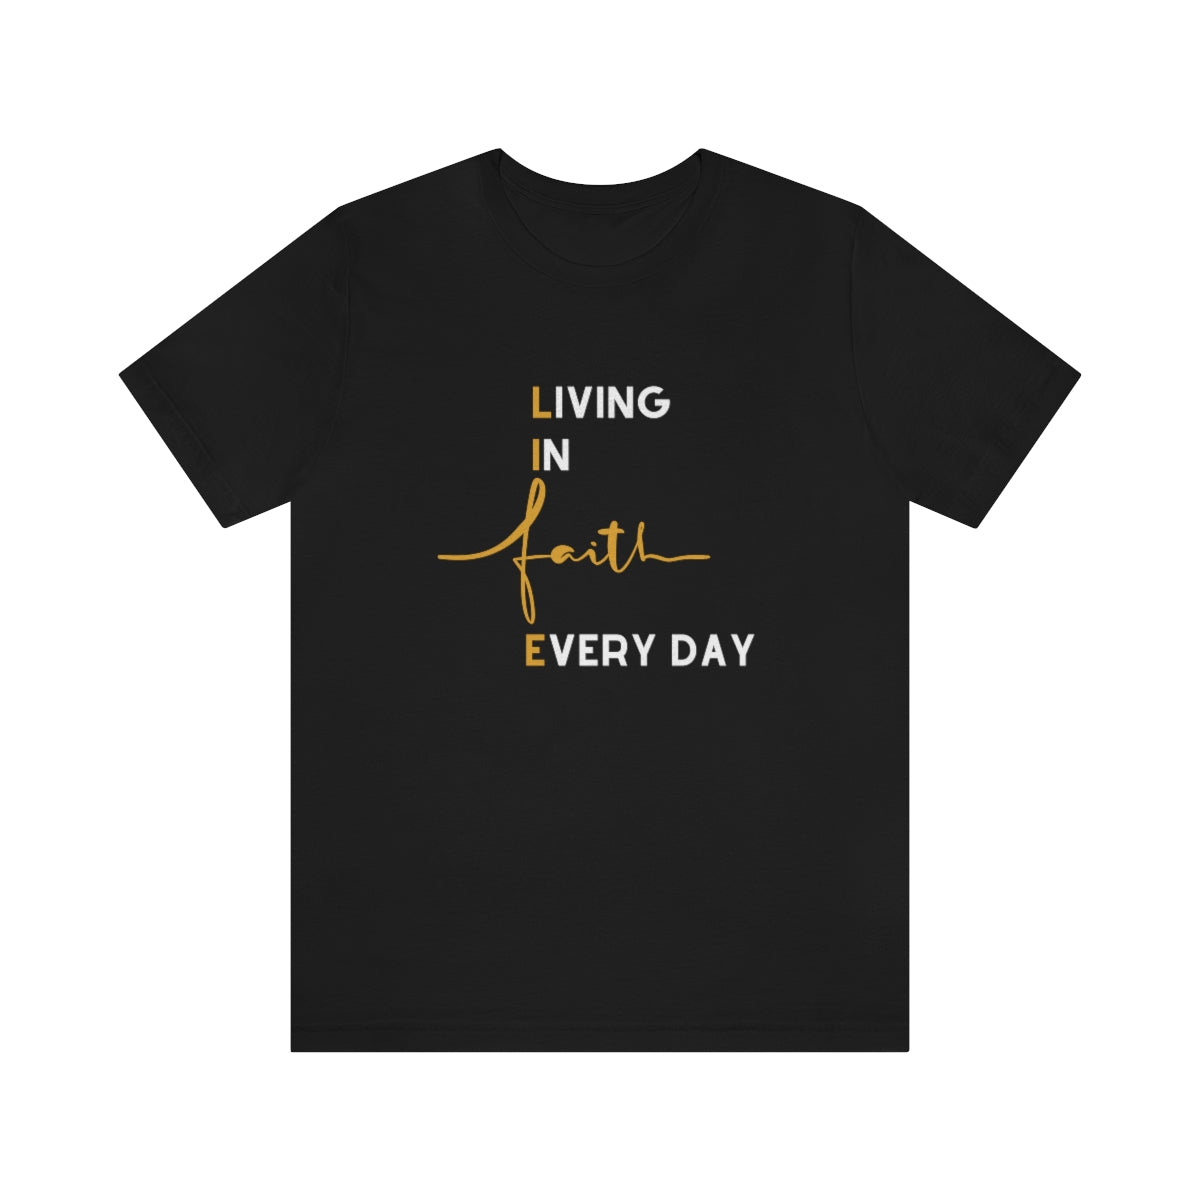 LIFE: LIVING IN FAITH EVERY DAY T-SHIRT-T-Shirt-Black-S-mysticalcherry